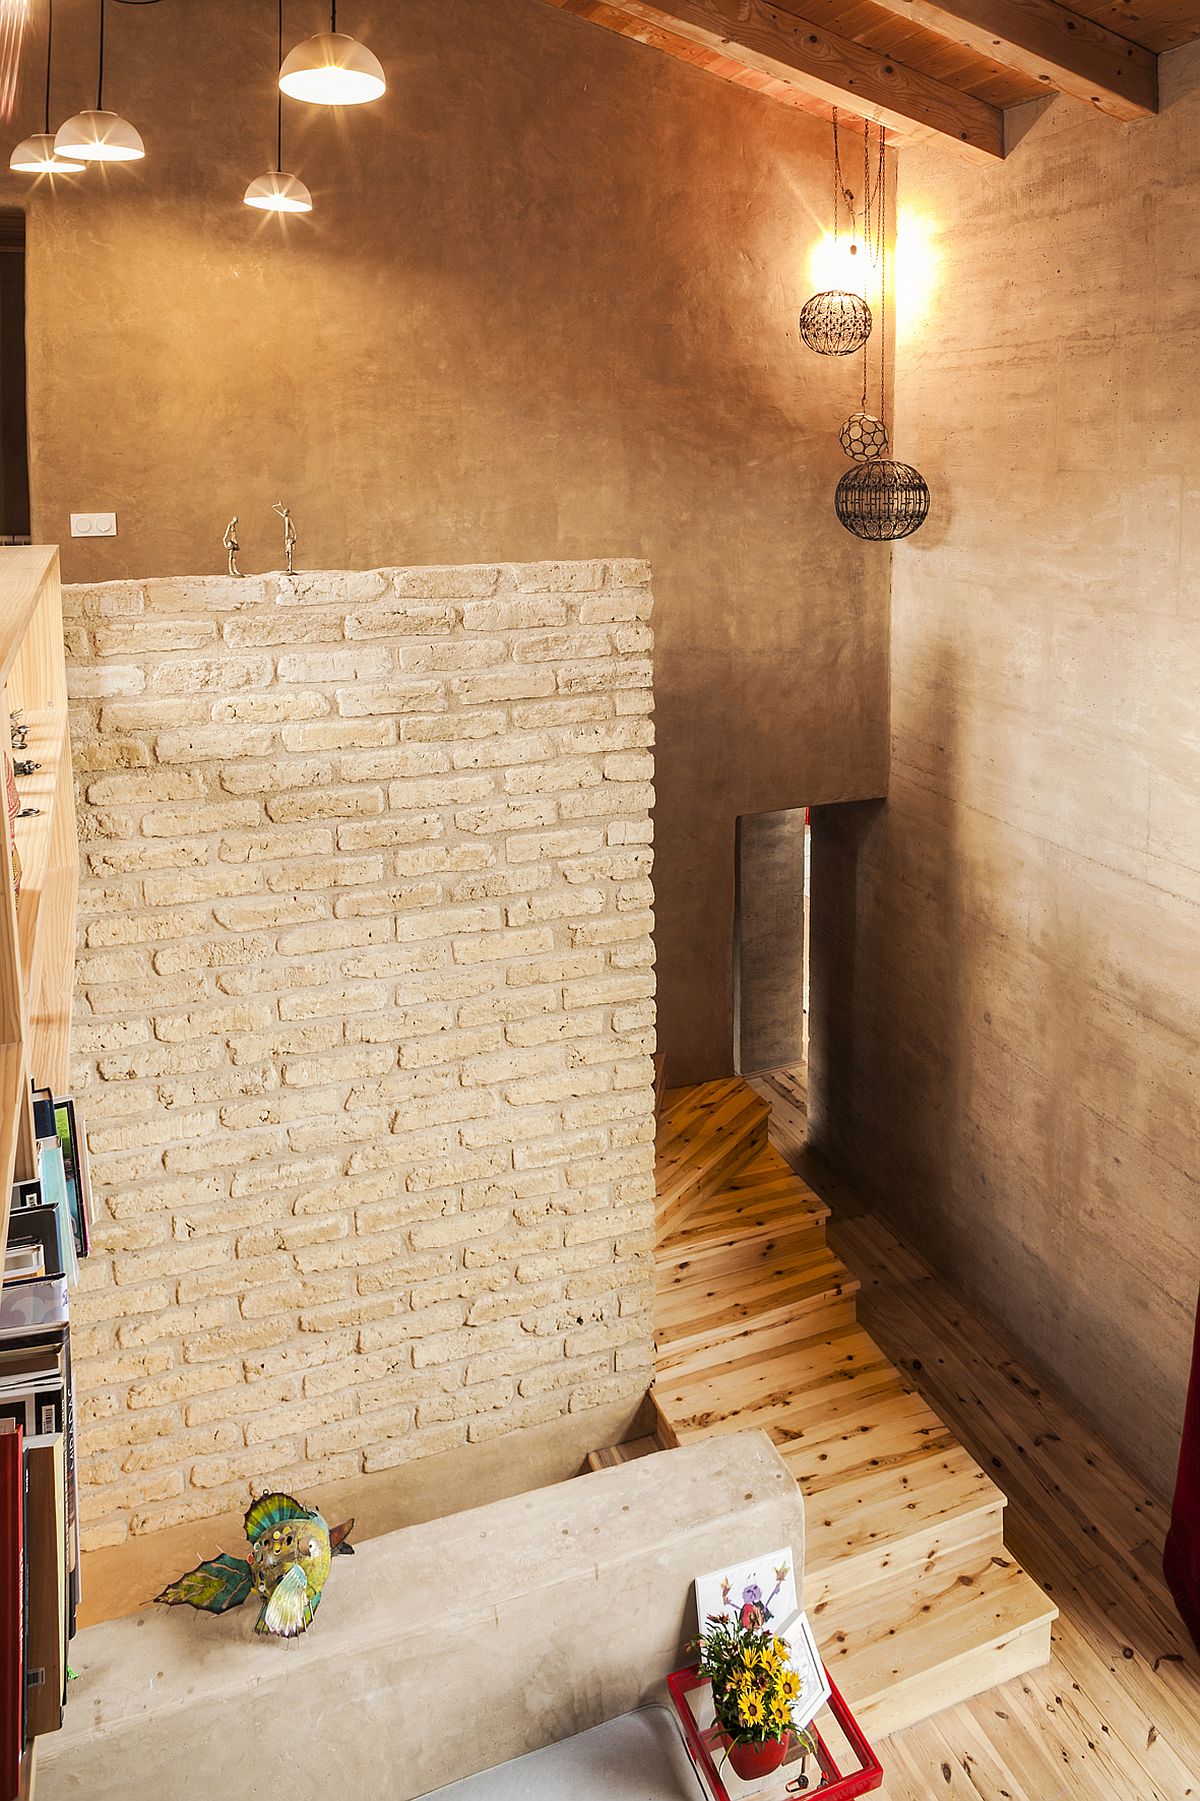 Brick and earthen walls give the double height living space a cool, inviting vibe